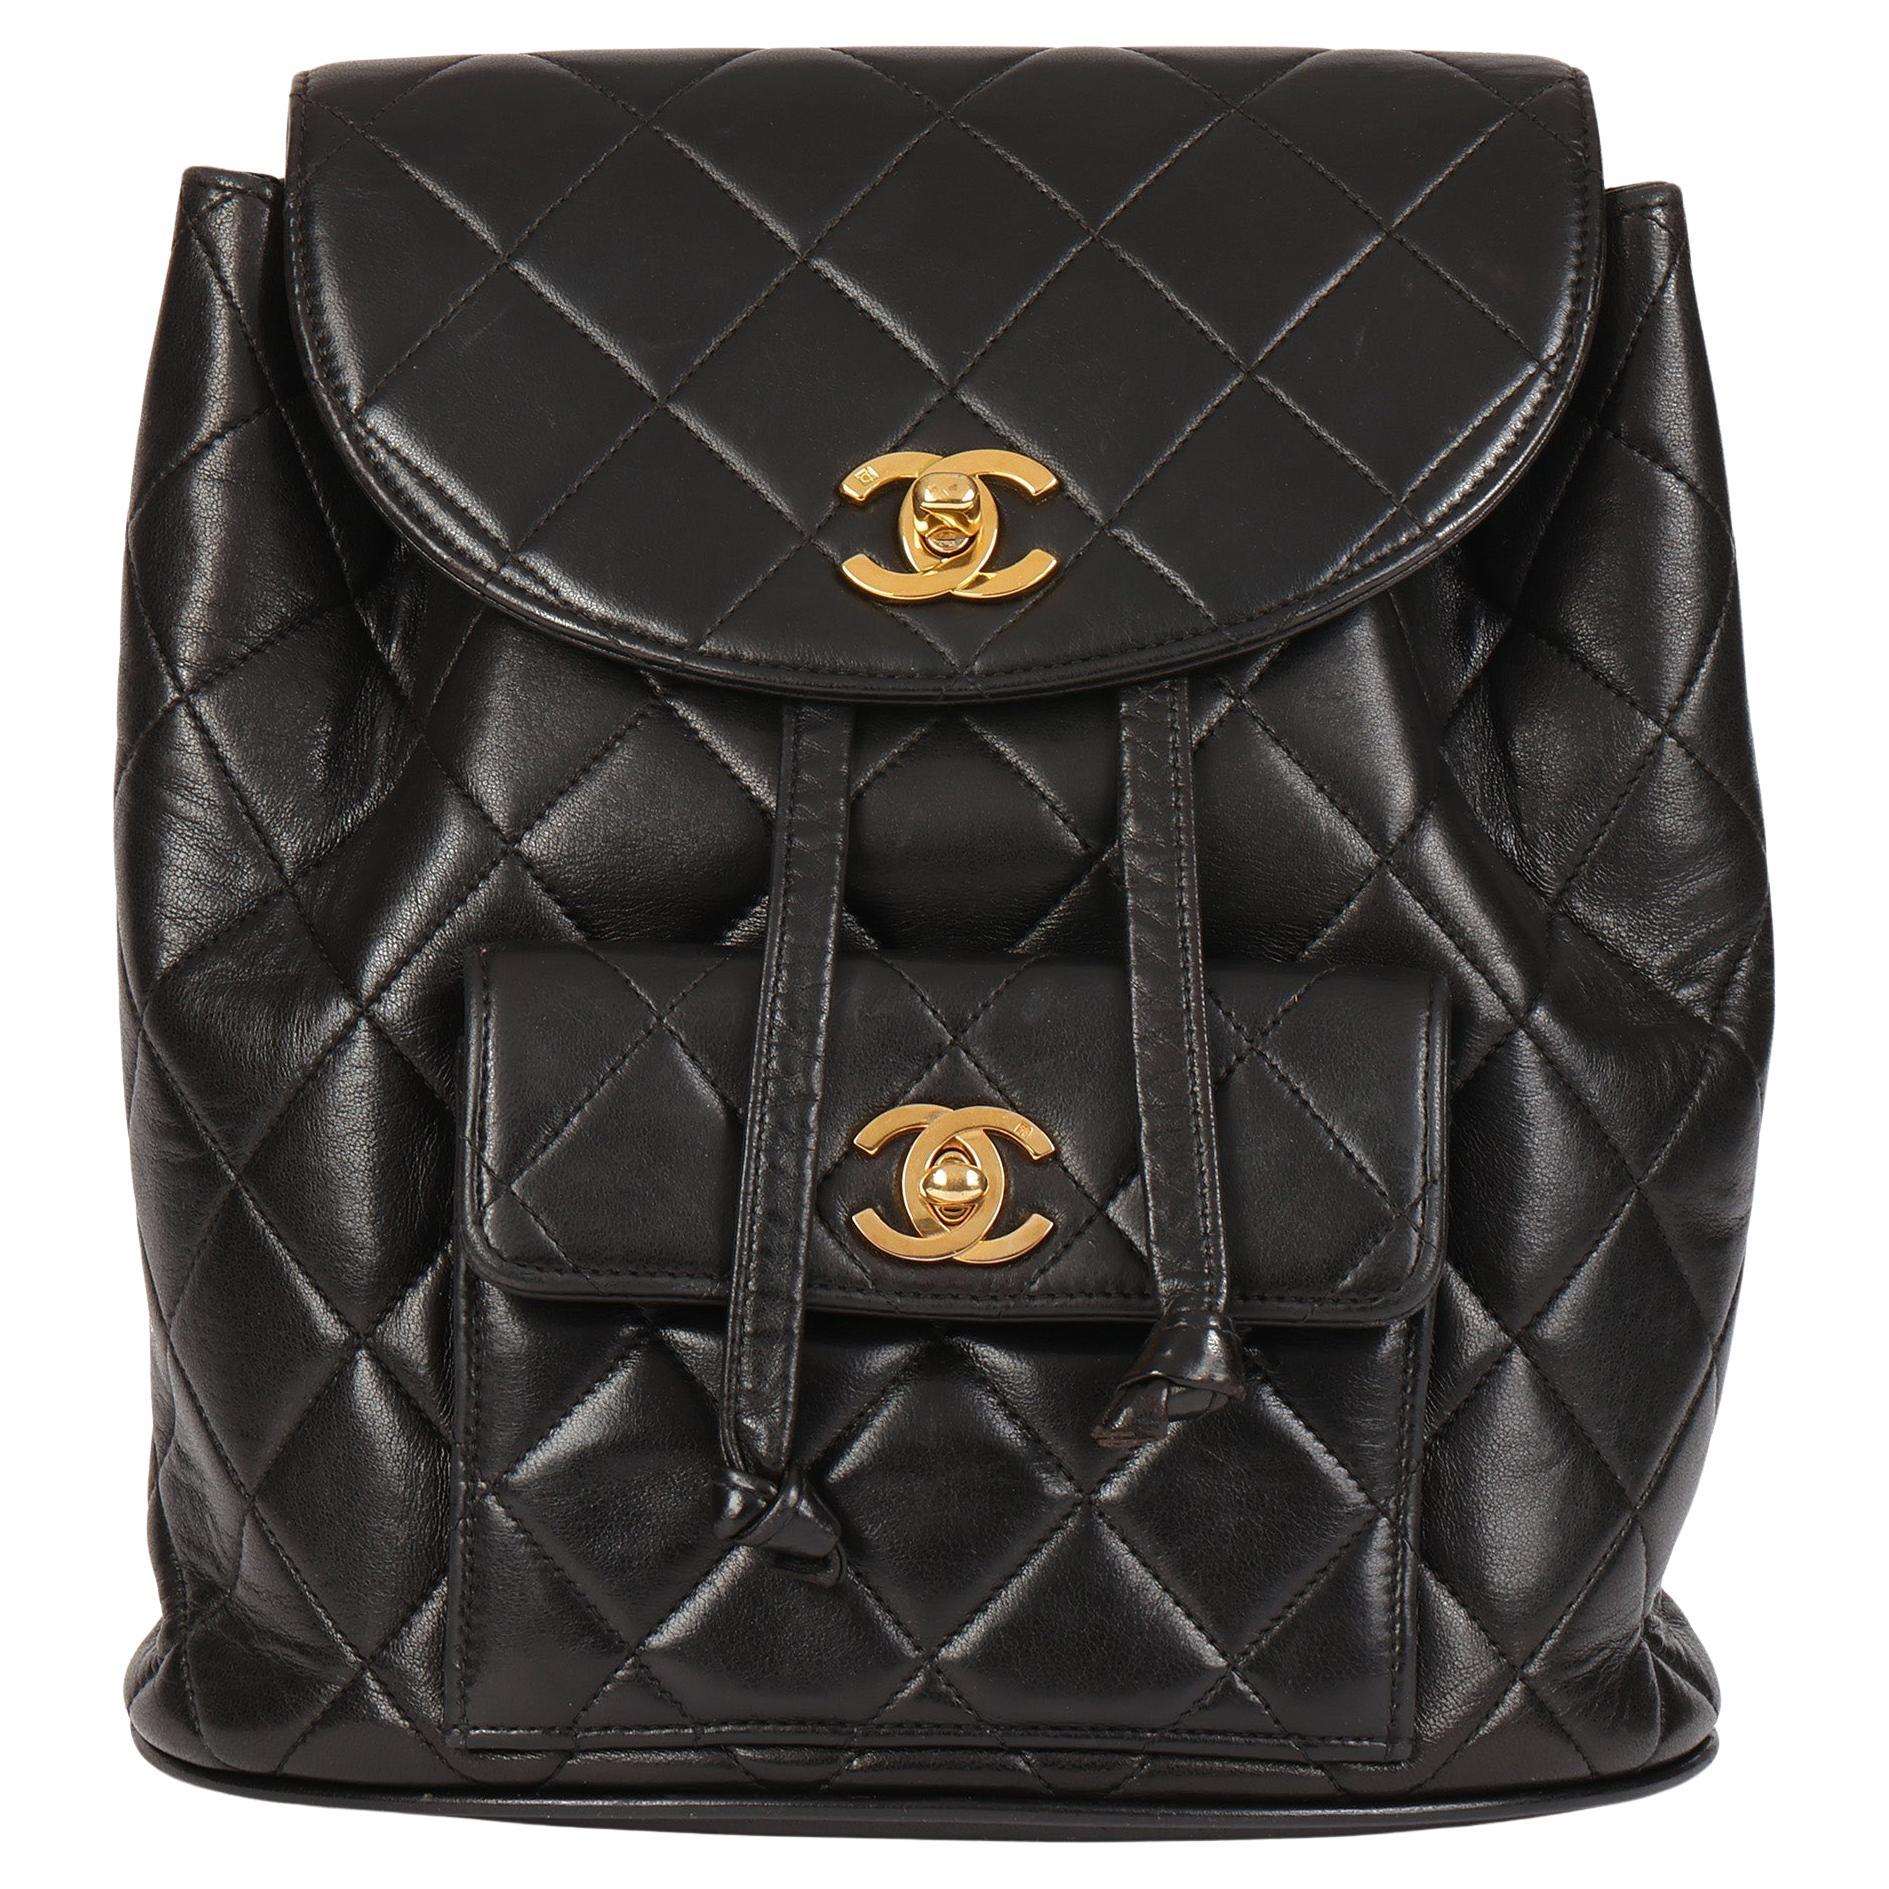 CHANEL Black Quilted Lambskin Vintage Classic Duma Backpack